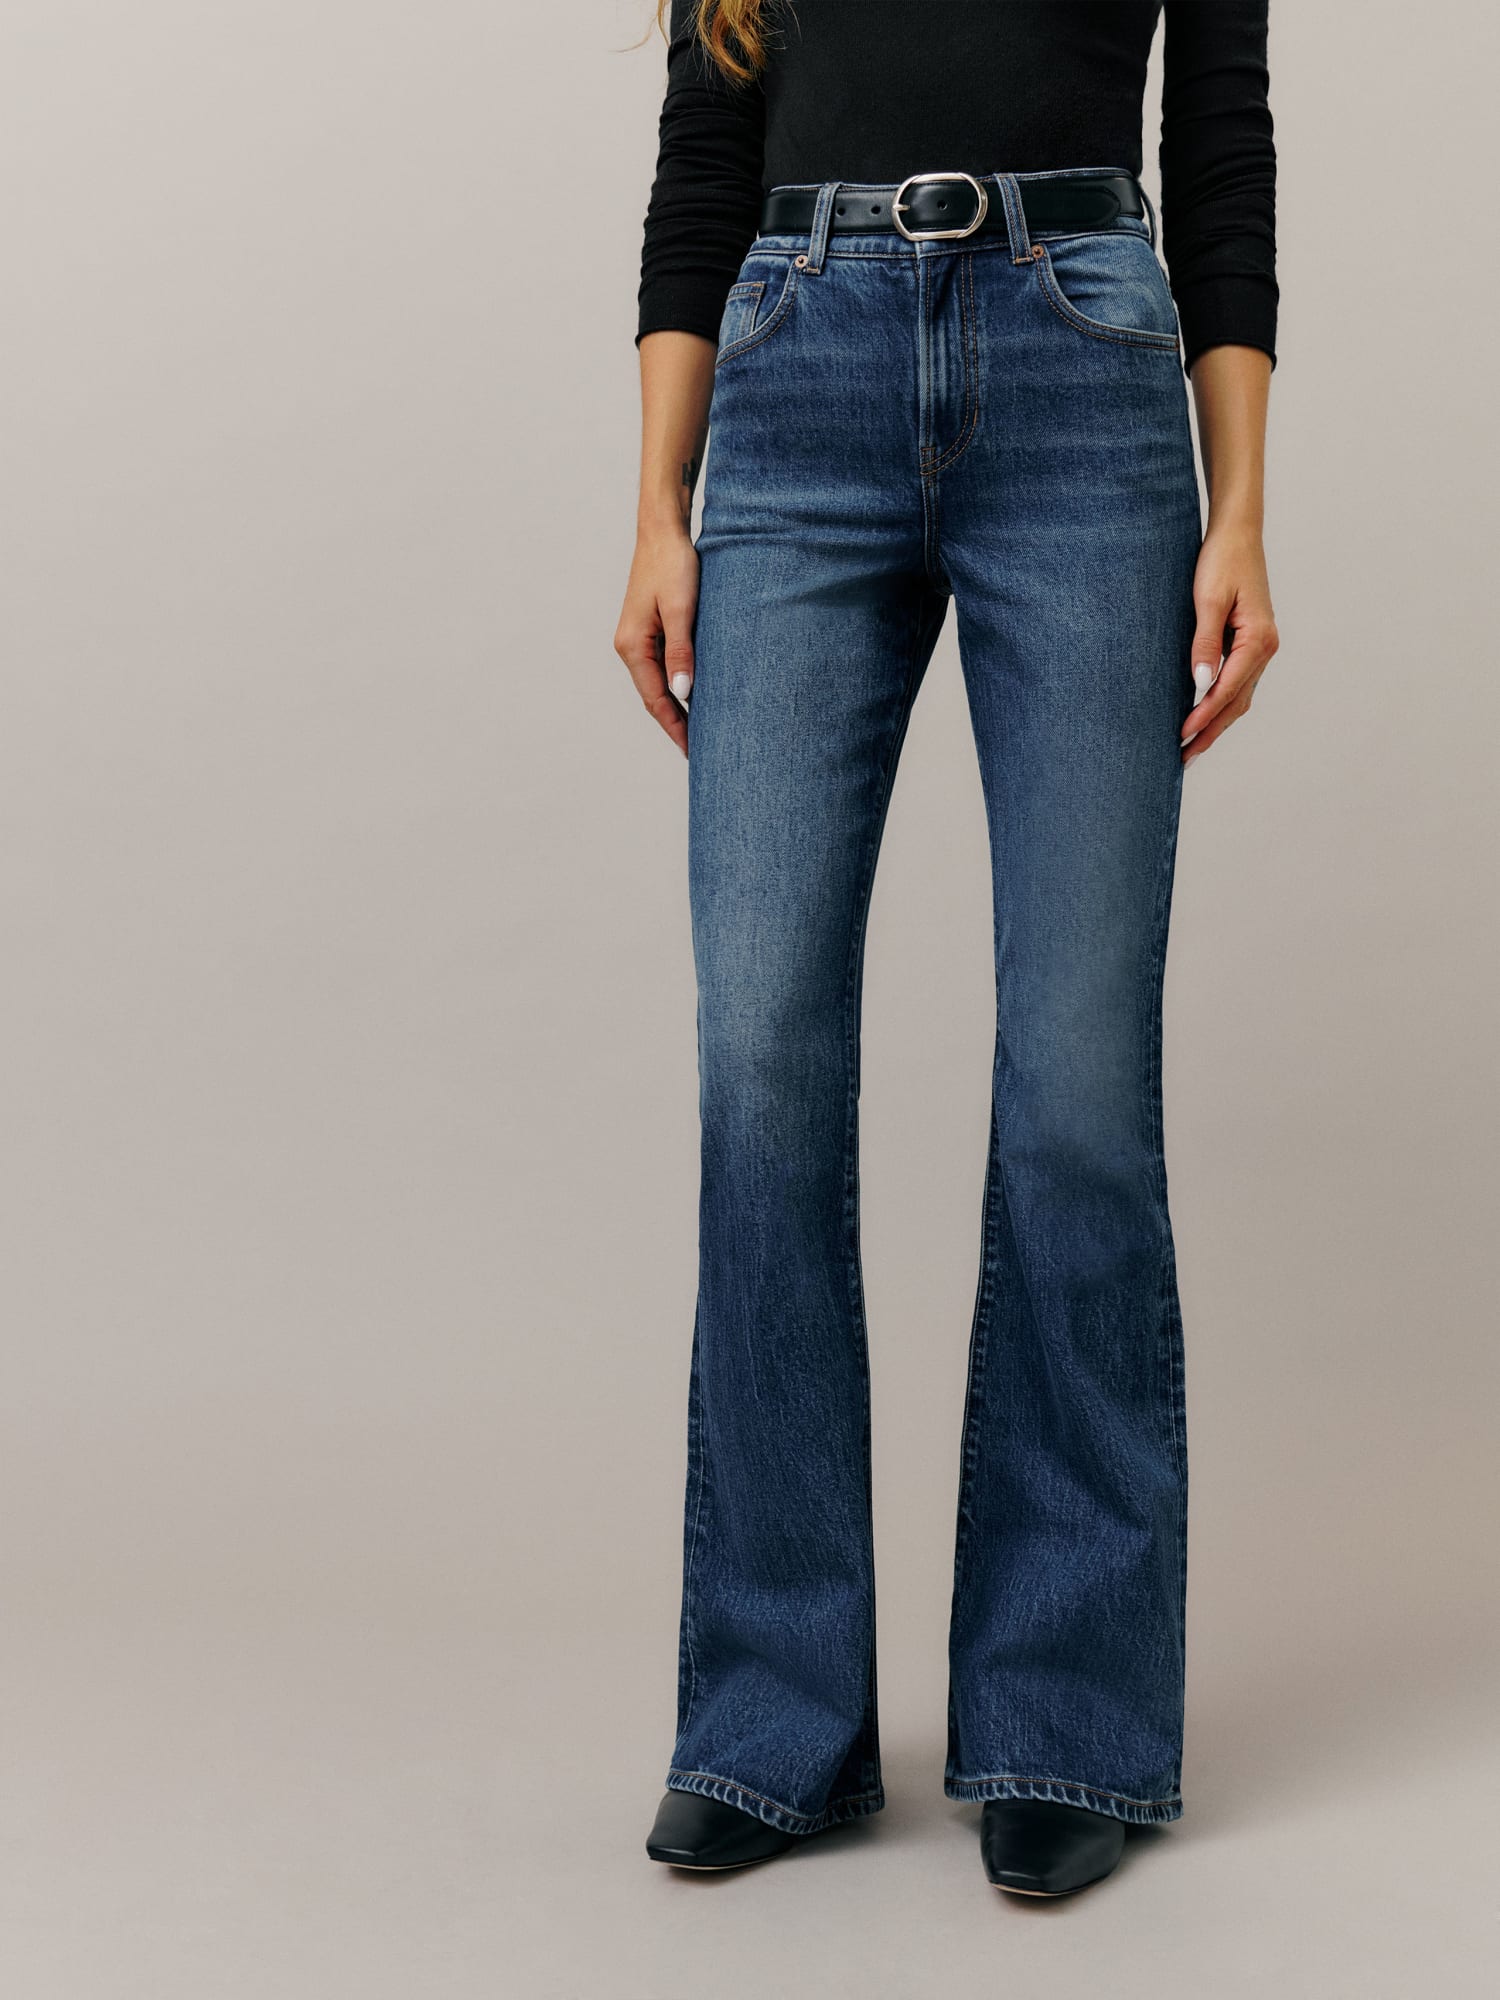 Margot High Rise Flare Jeans  Flare jeans, Flares, Cool outfits